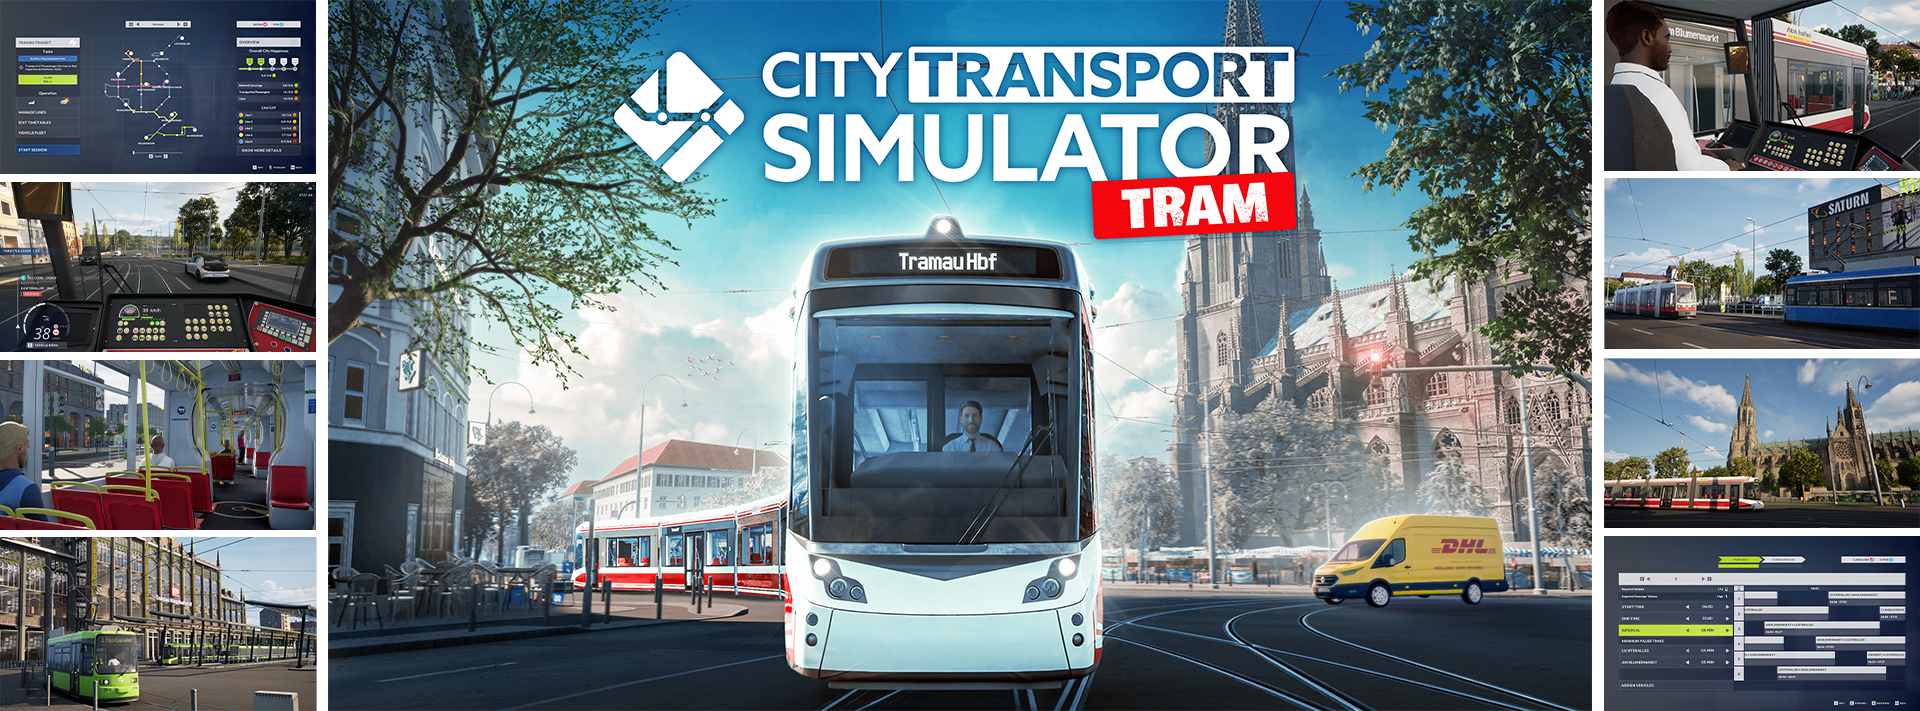 Banner with various images for City Transport Simulator: Tram